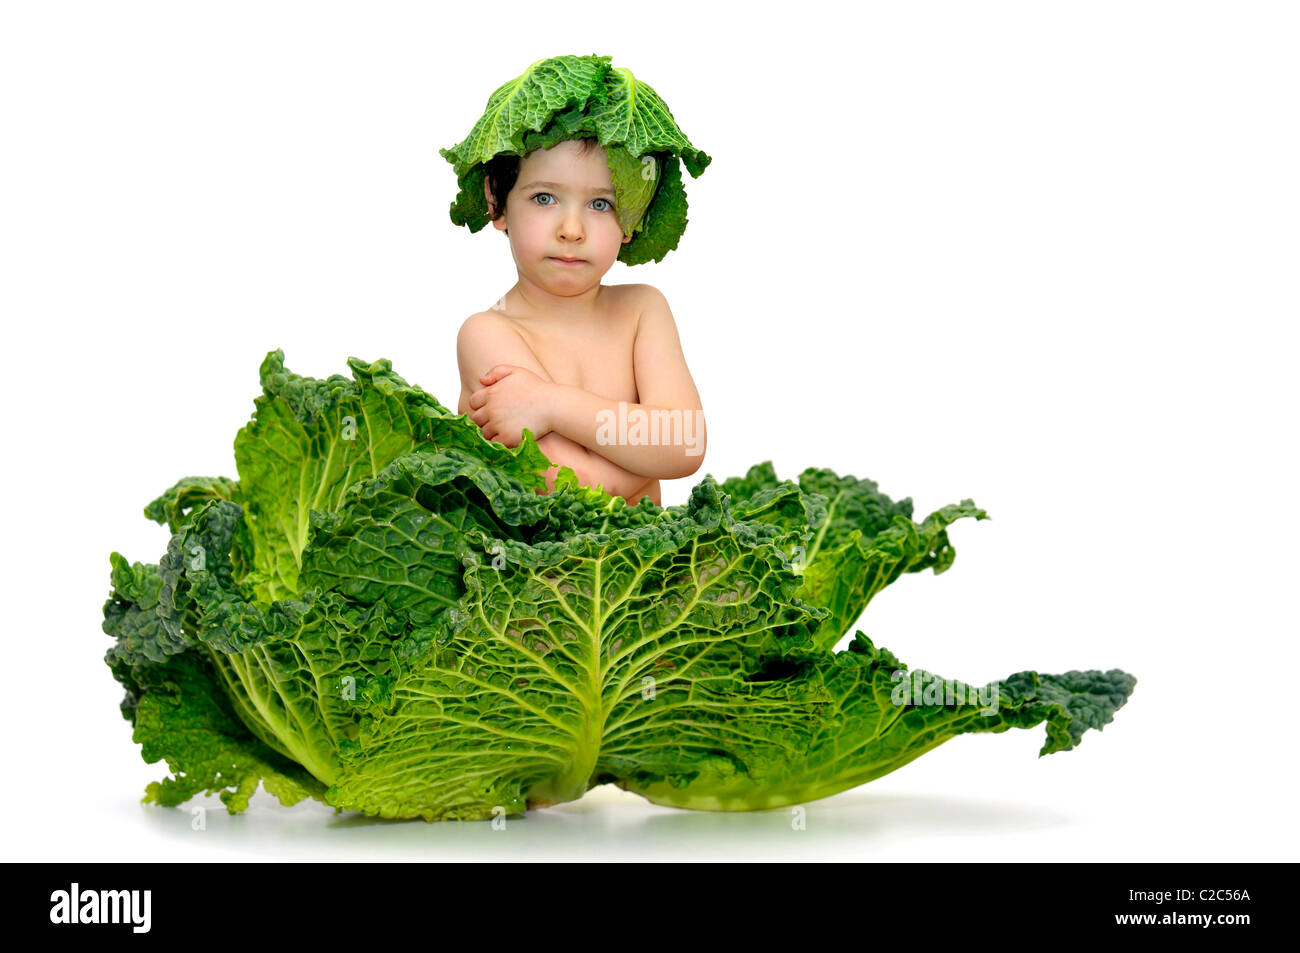 Beautiful young boy inside a cabbage Stock Photo